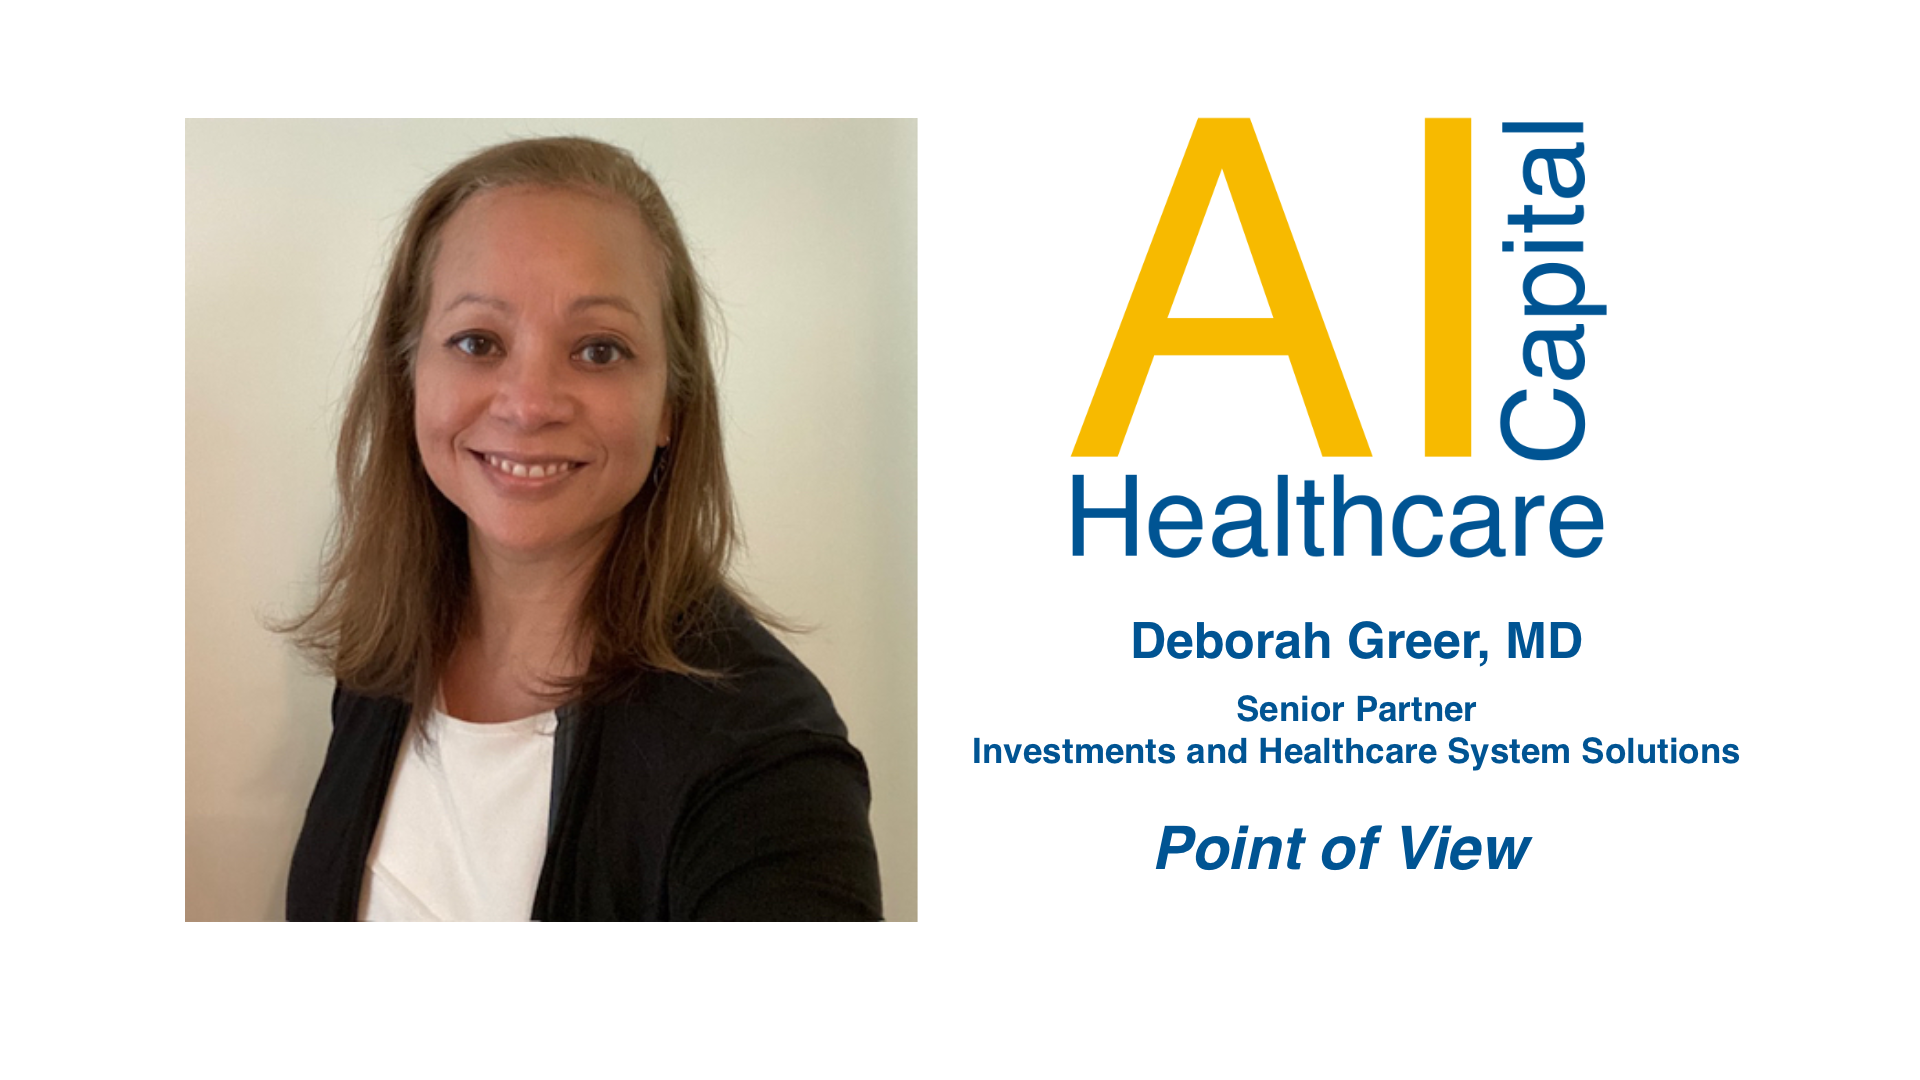 Dr. Greer Shares Her Thoughts About Joining The Team